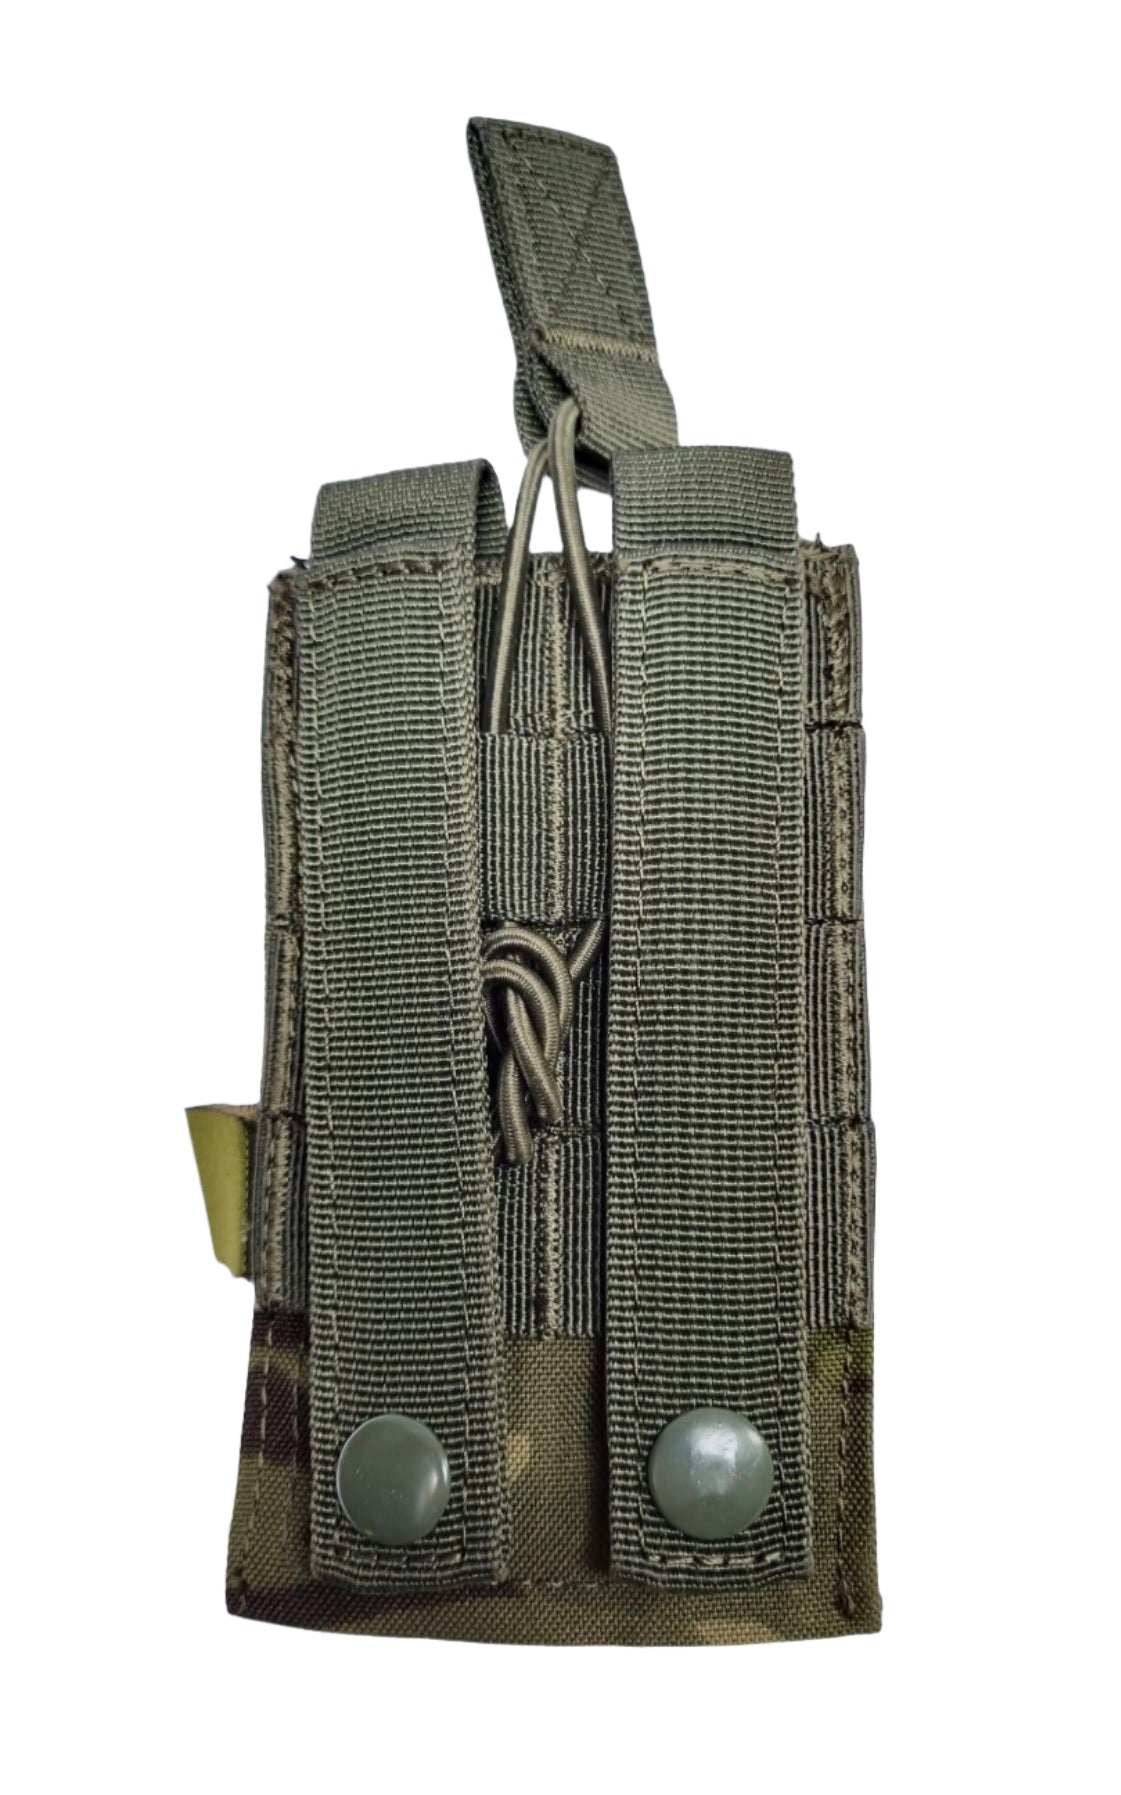 SHS - 1090 STACKER OPEN-TOP MAG POUCH SINGLE COLOUR MULTICAM GREEN